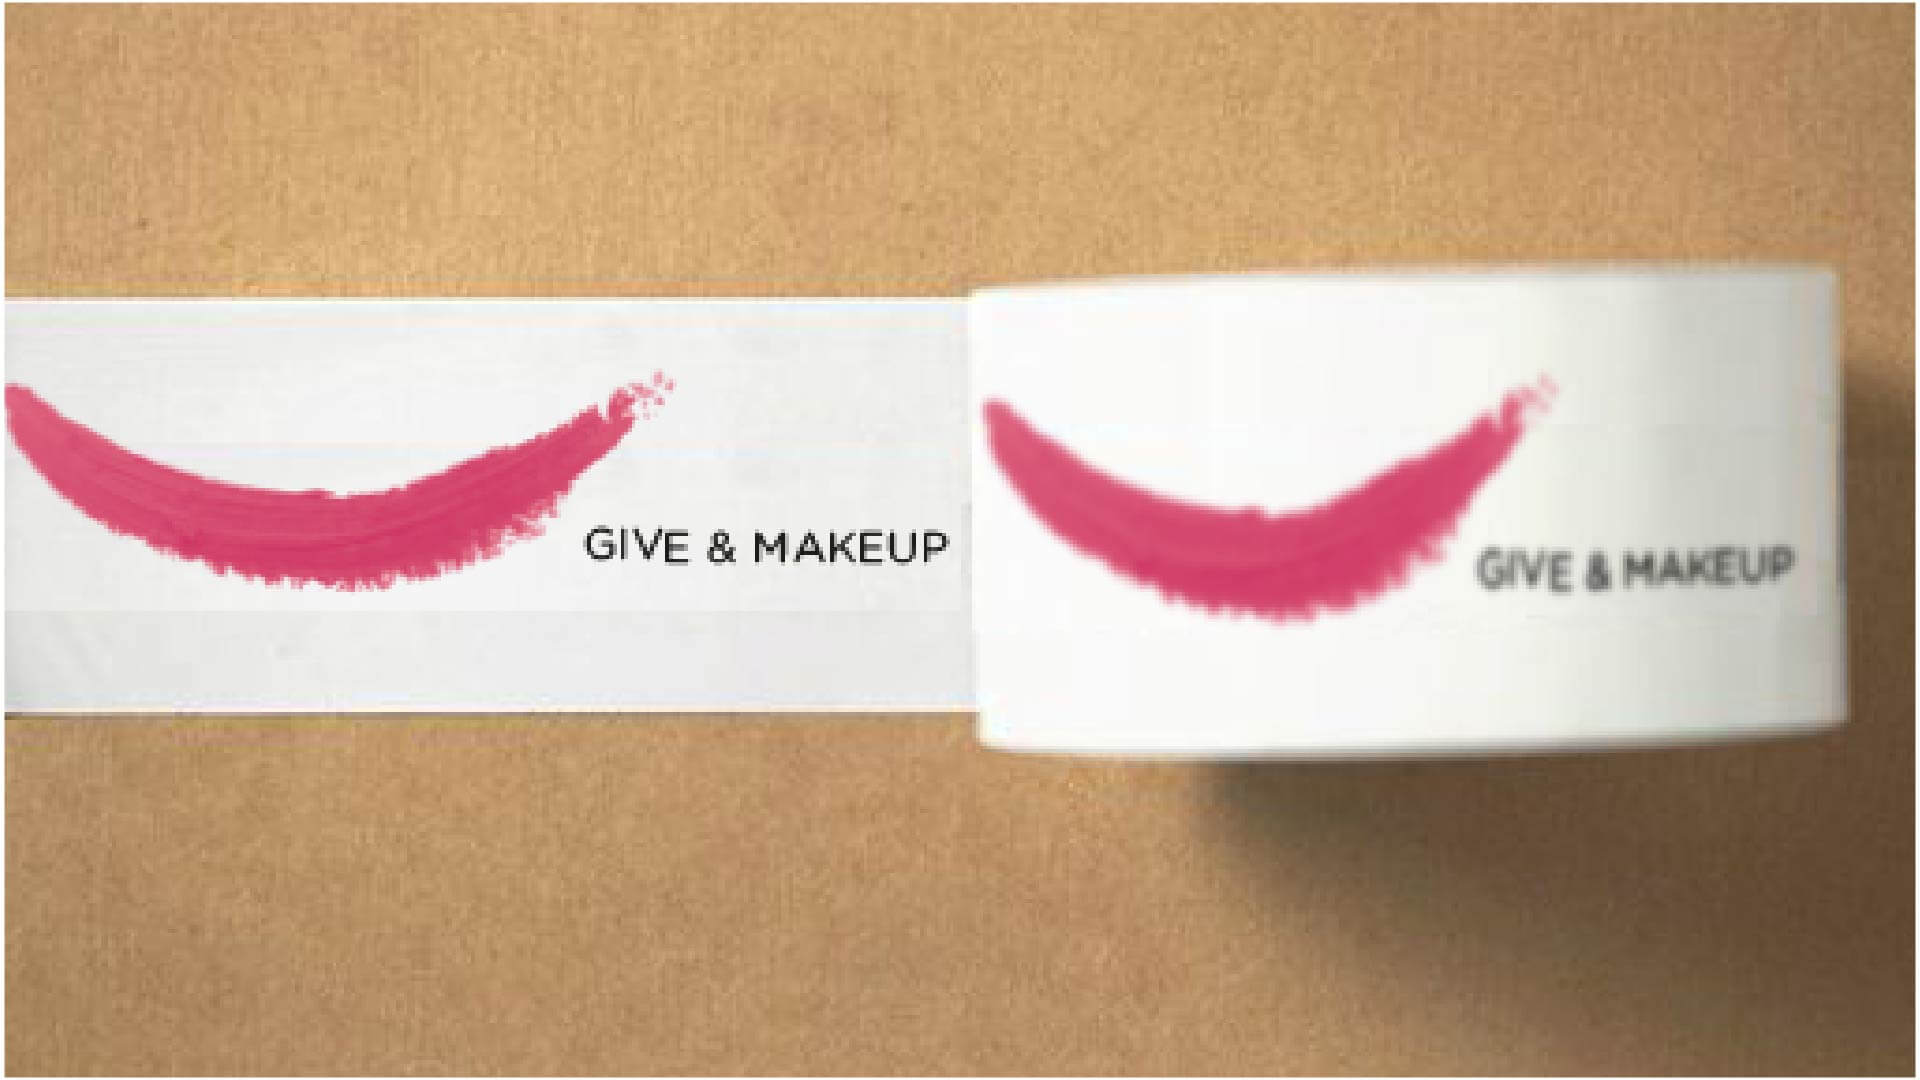 Give & Makeup Brand Identity Design